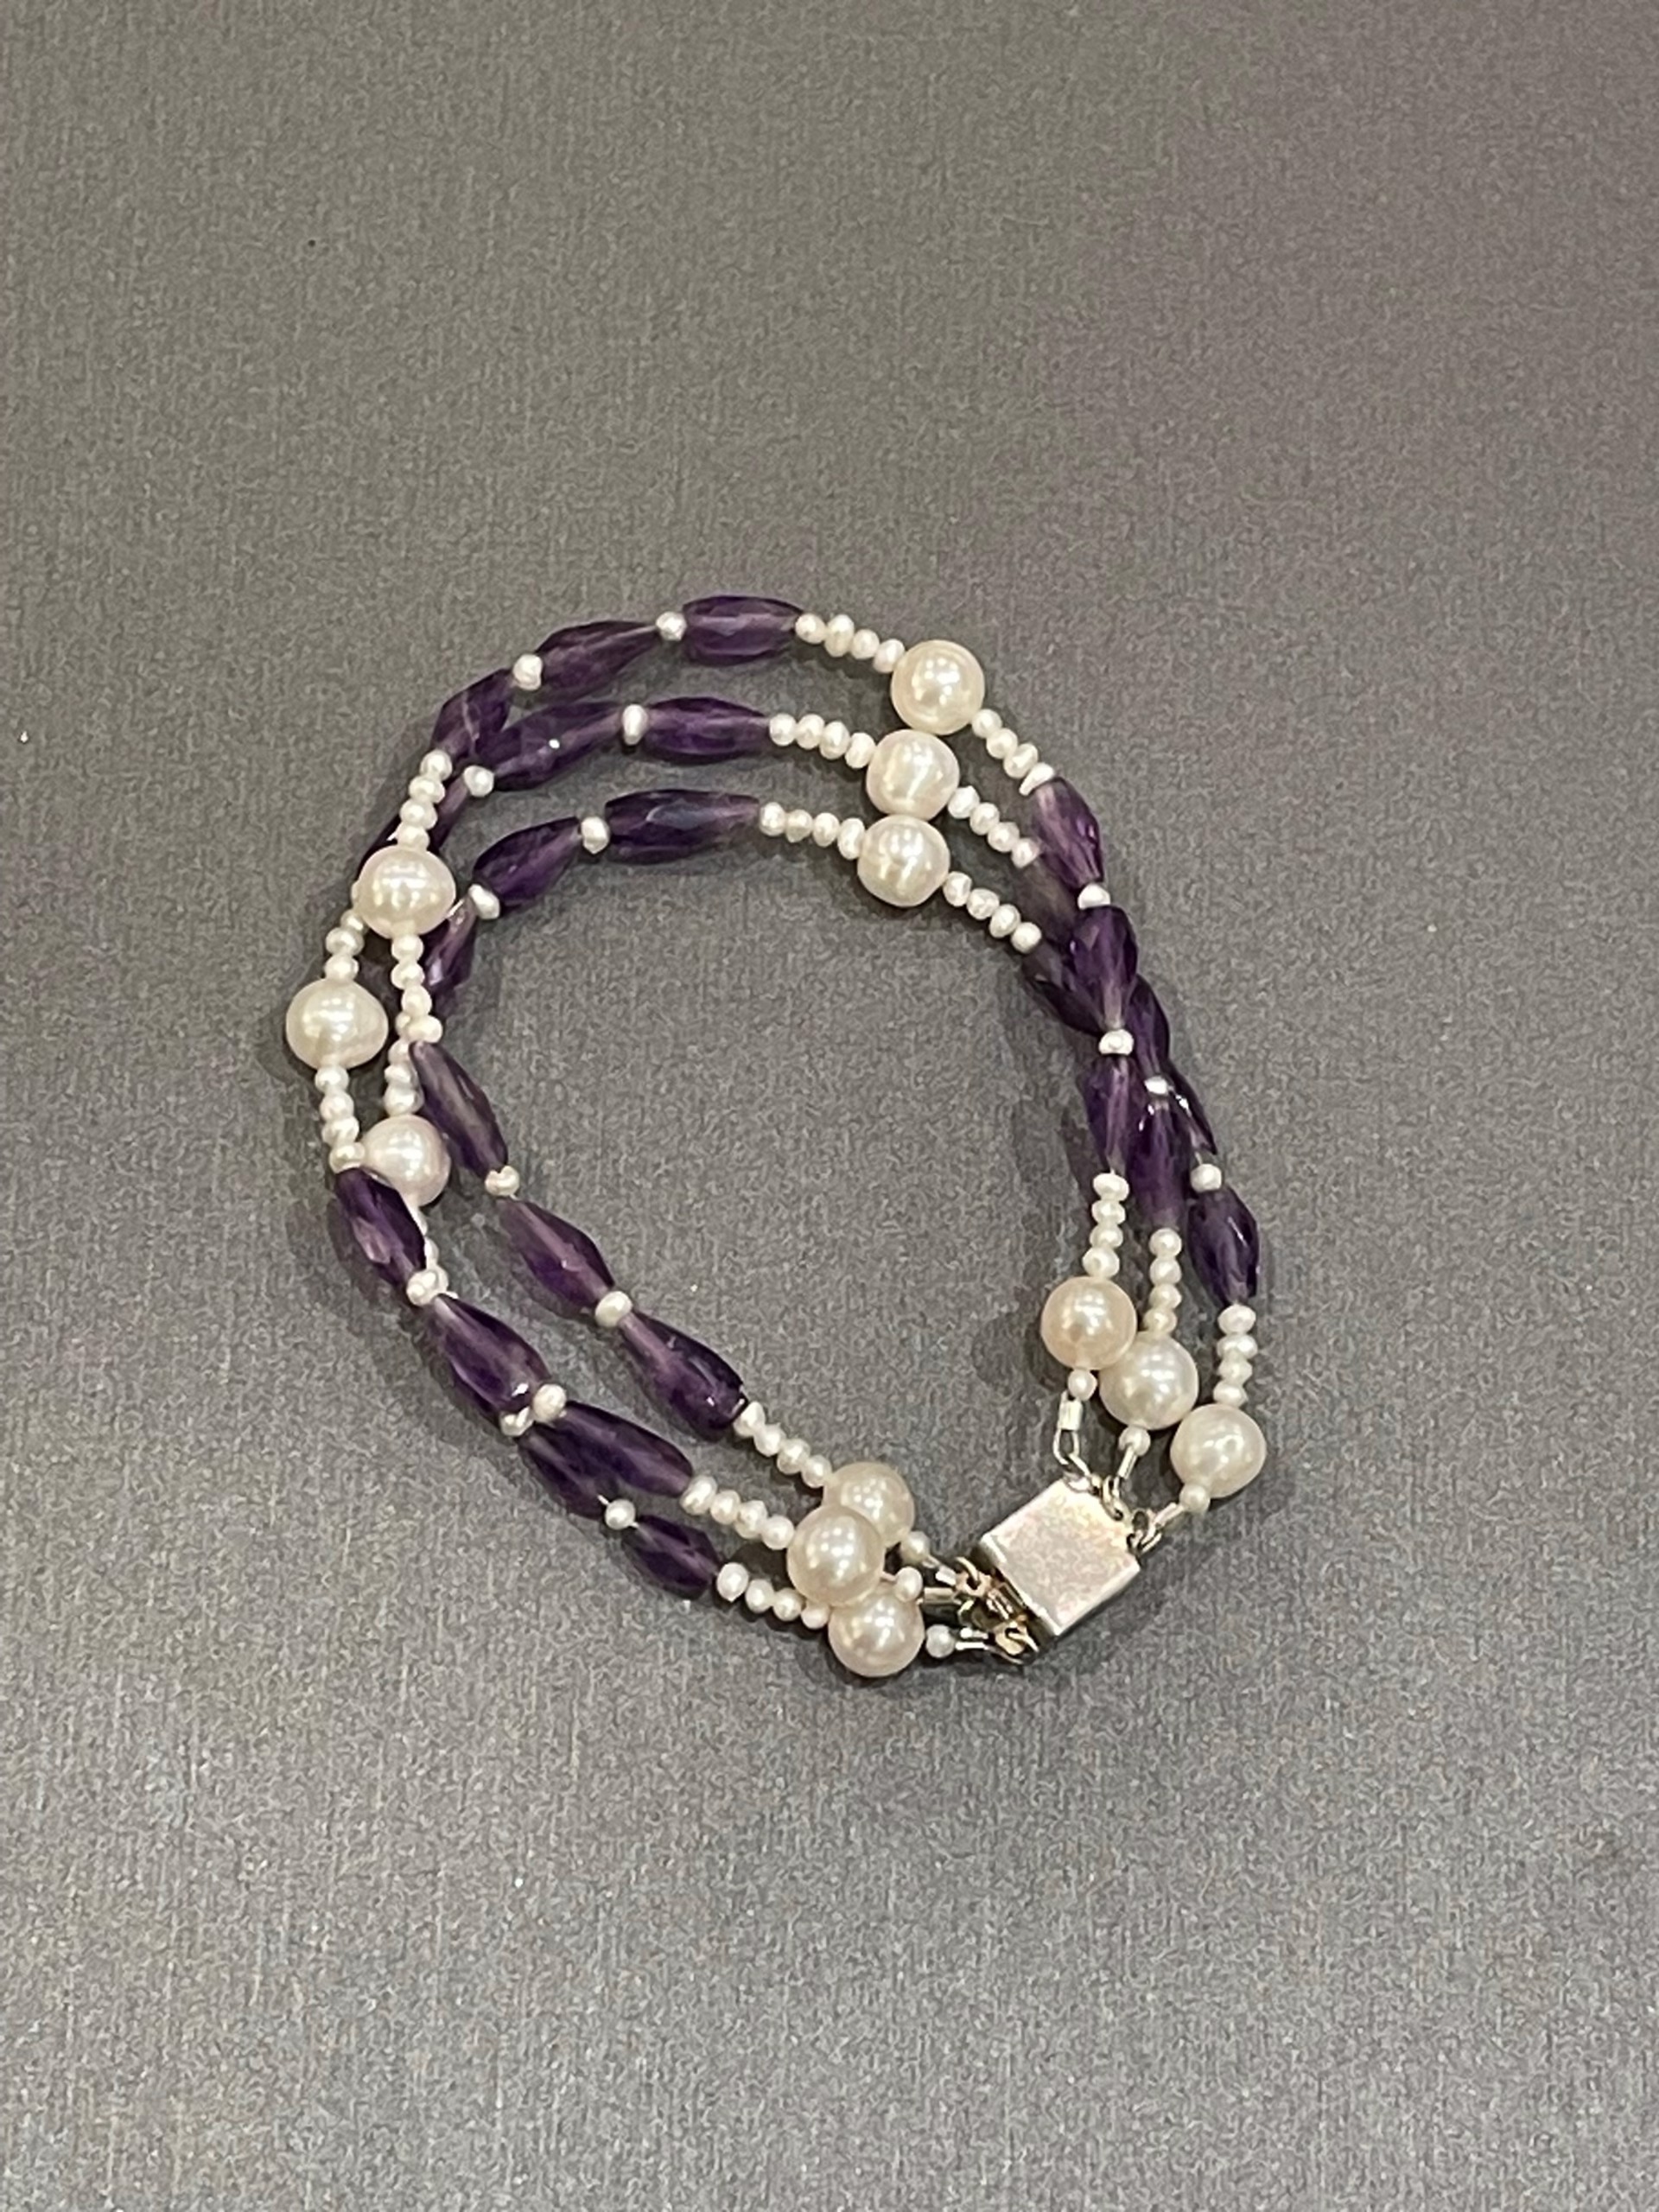 Amethyst and Pearl Bracelet by Patrice Box